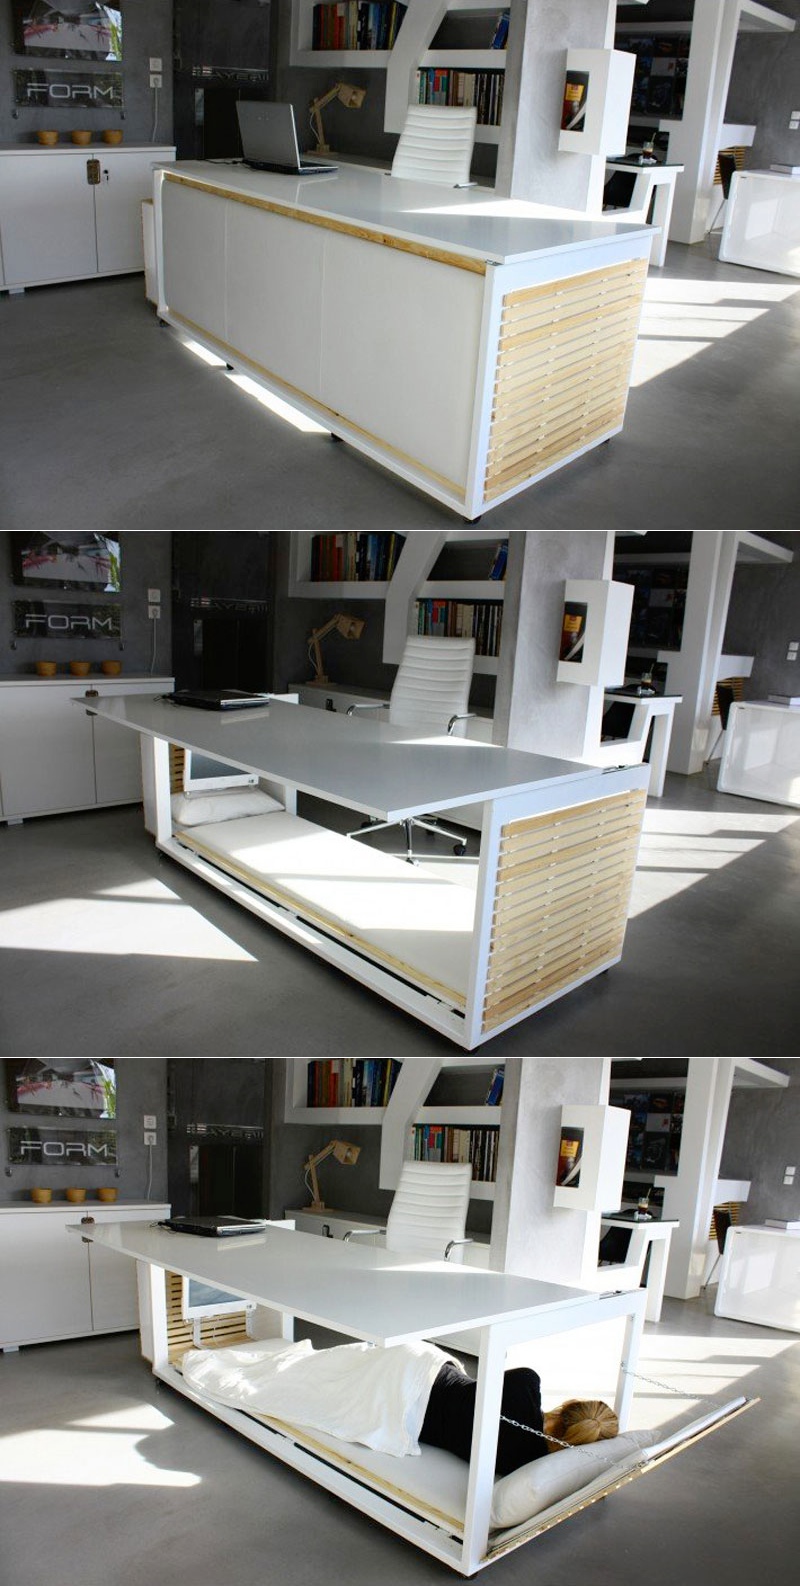 Creative desk with bed "width =" 800 "height =" 1586 "srcset =" https://mileray.com/wp-content/uploads/2020/05/1588505101_204_Inspirational-Workspace-Design-Makes-Your-Bedroom-Looks-Trendy-and-Awesome.jpeg 800w, https: / /mileray.com/wp-content/uploads/2016/02/28-Work-desk-bed-151x300.jpeg 151w, https://mileray.com/wp-content/uploads/2016/02/28-Work - desk-bed-768x1523.jpeg 768w, https://mileray.com/wp-content/uploads/2016/02/28-Work-desk-bed-517x1024.jpeg 517w, https://mileray.com/wp - content / uploads / 2016/02 / 28-Work-Desk-Bett-696x1380.jpeg 696w, https://mileray.com/wp-content/uploads/2016/02/28-Work-desk-bed-212x420. JPEG 212w "sizes =" (maximum width: 800px) 100vw, 800px